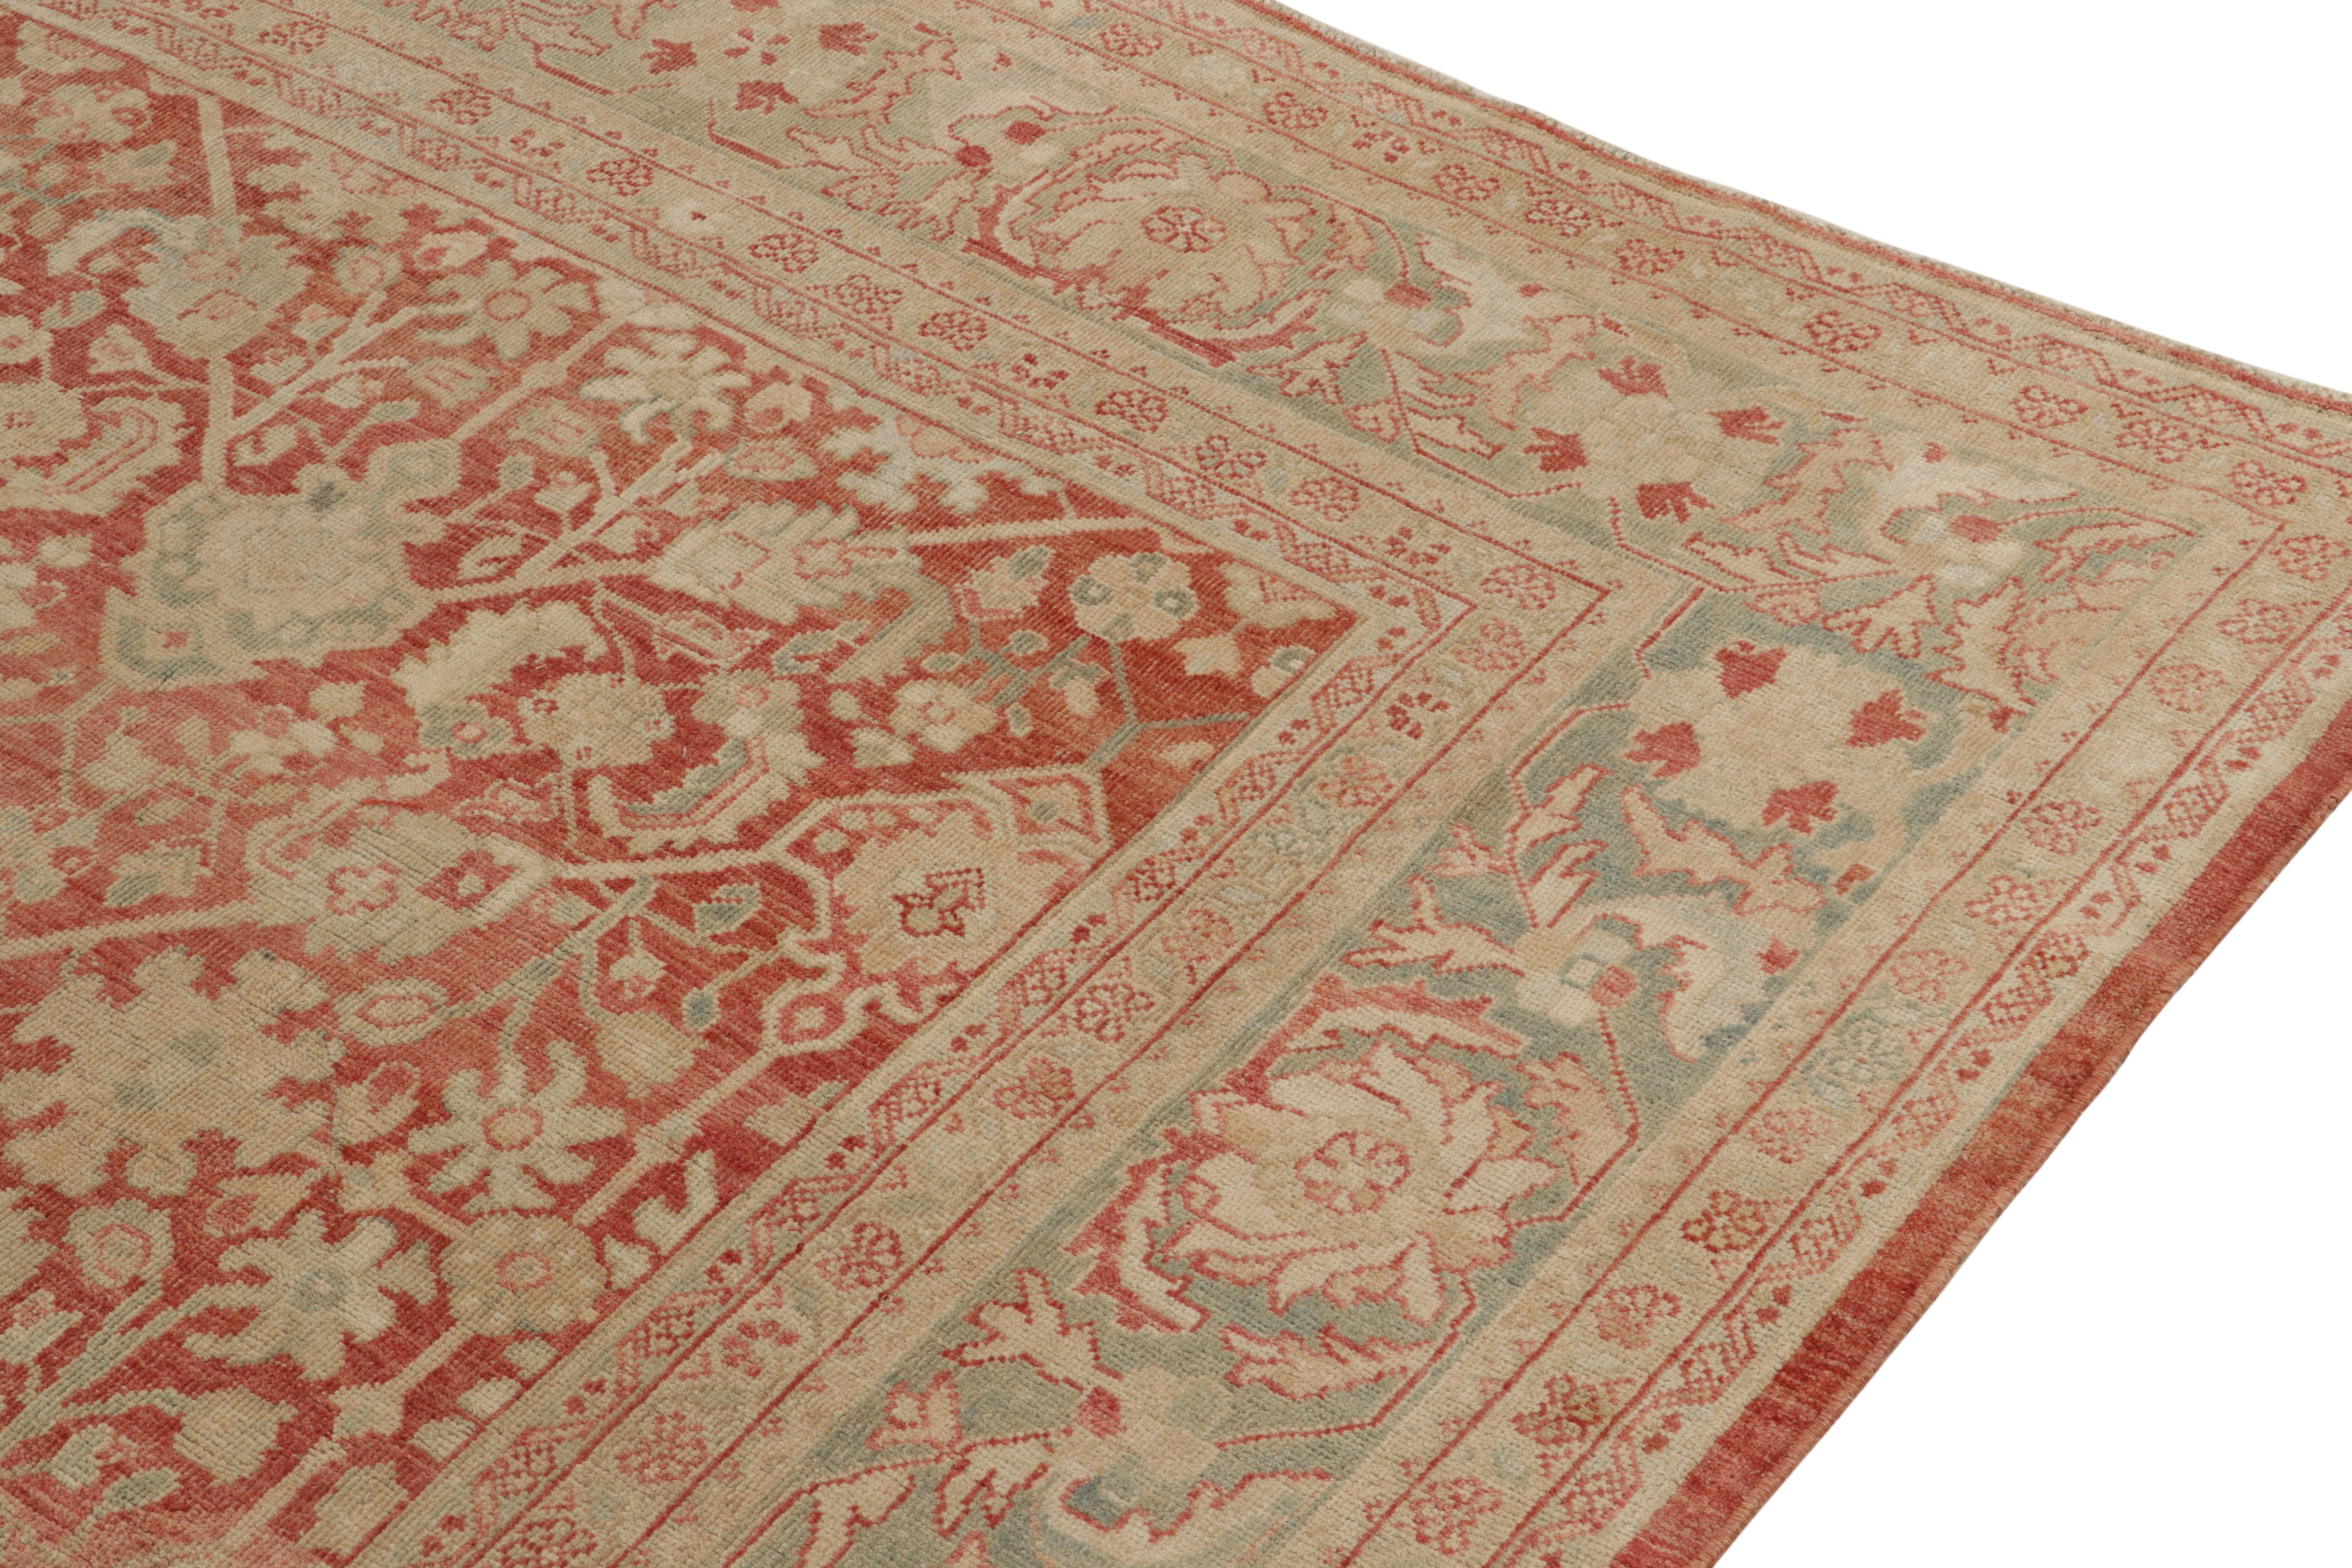 Antique Tabriz Rug in Red & Beige-Brown Floral Pattern by Rug & Kilim In Good Condition For Sale In Long Island City, NY